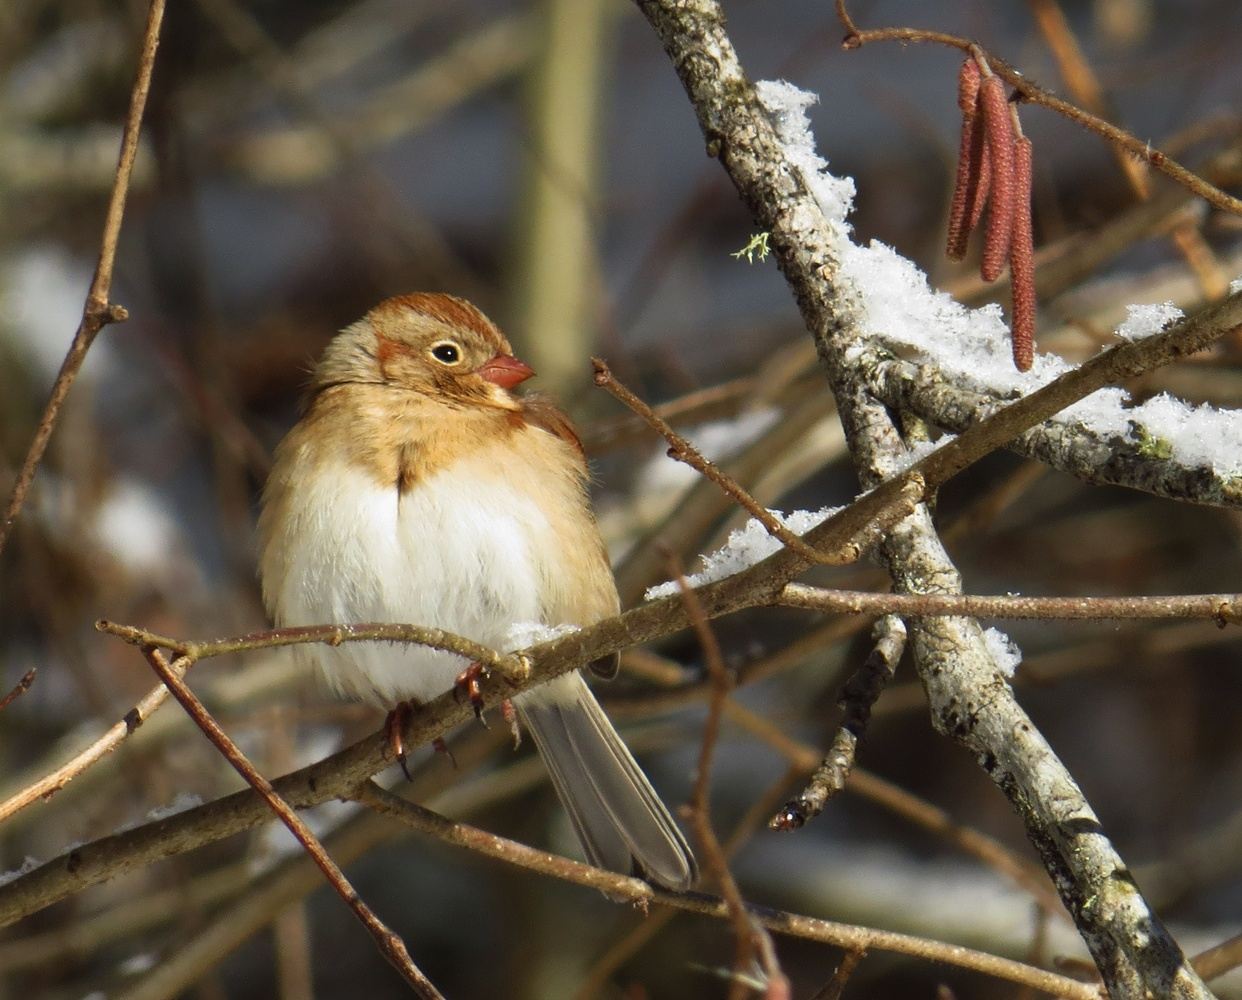 Sparrows of the Southern Appalachians